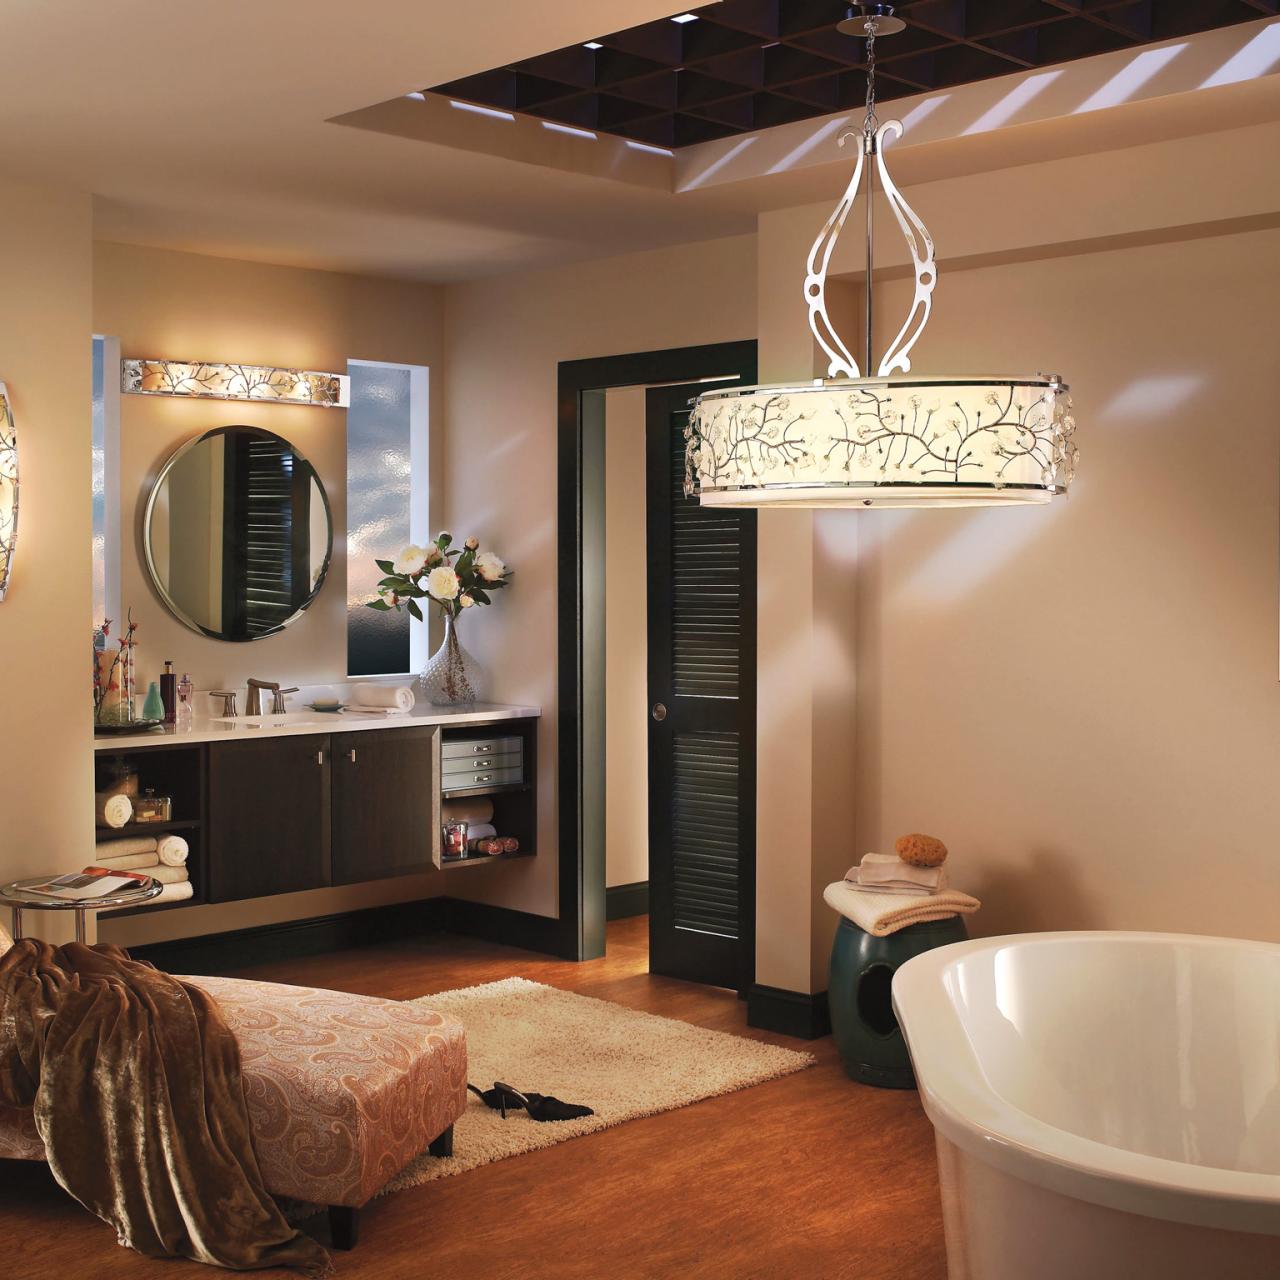 Luxury Bathroom Ideas: A Style Guide - Love Happens Mag